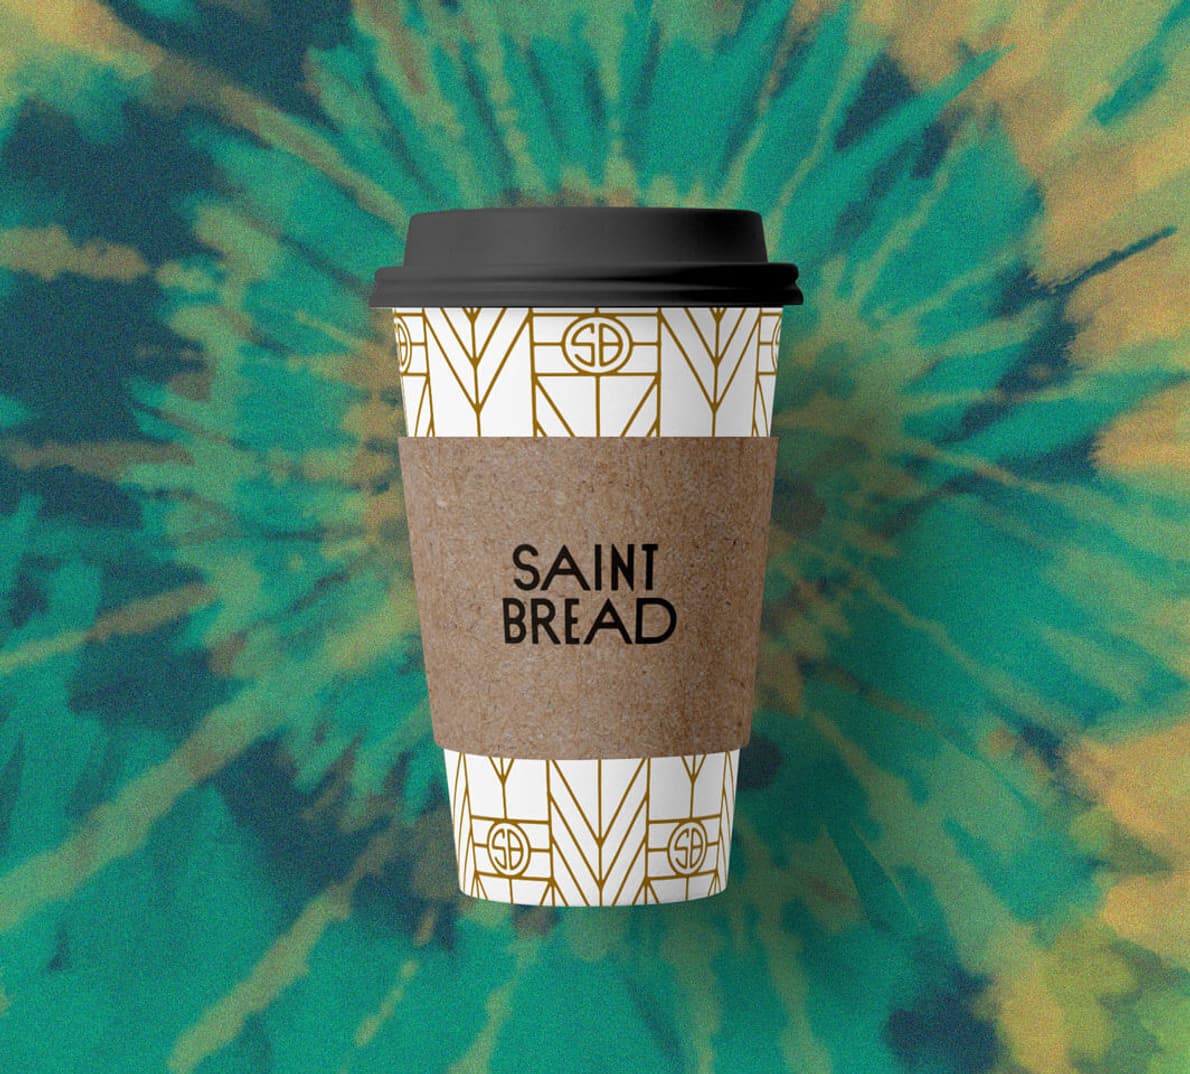 A Saint Bread cup on a tie-dye background.